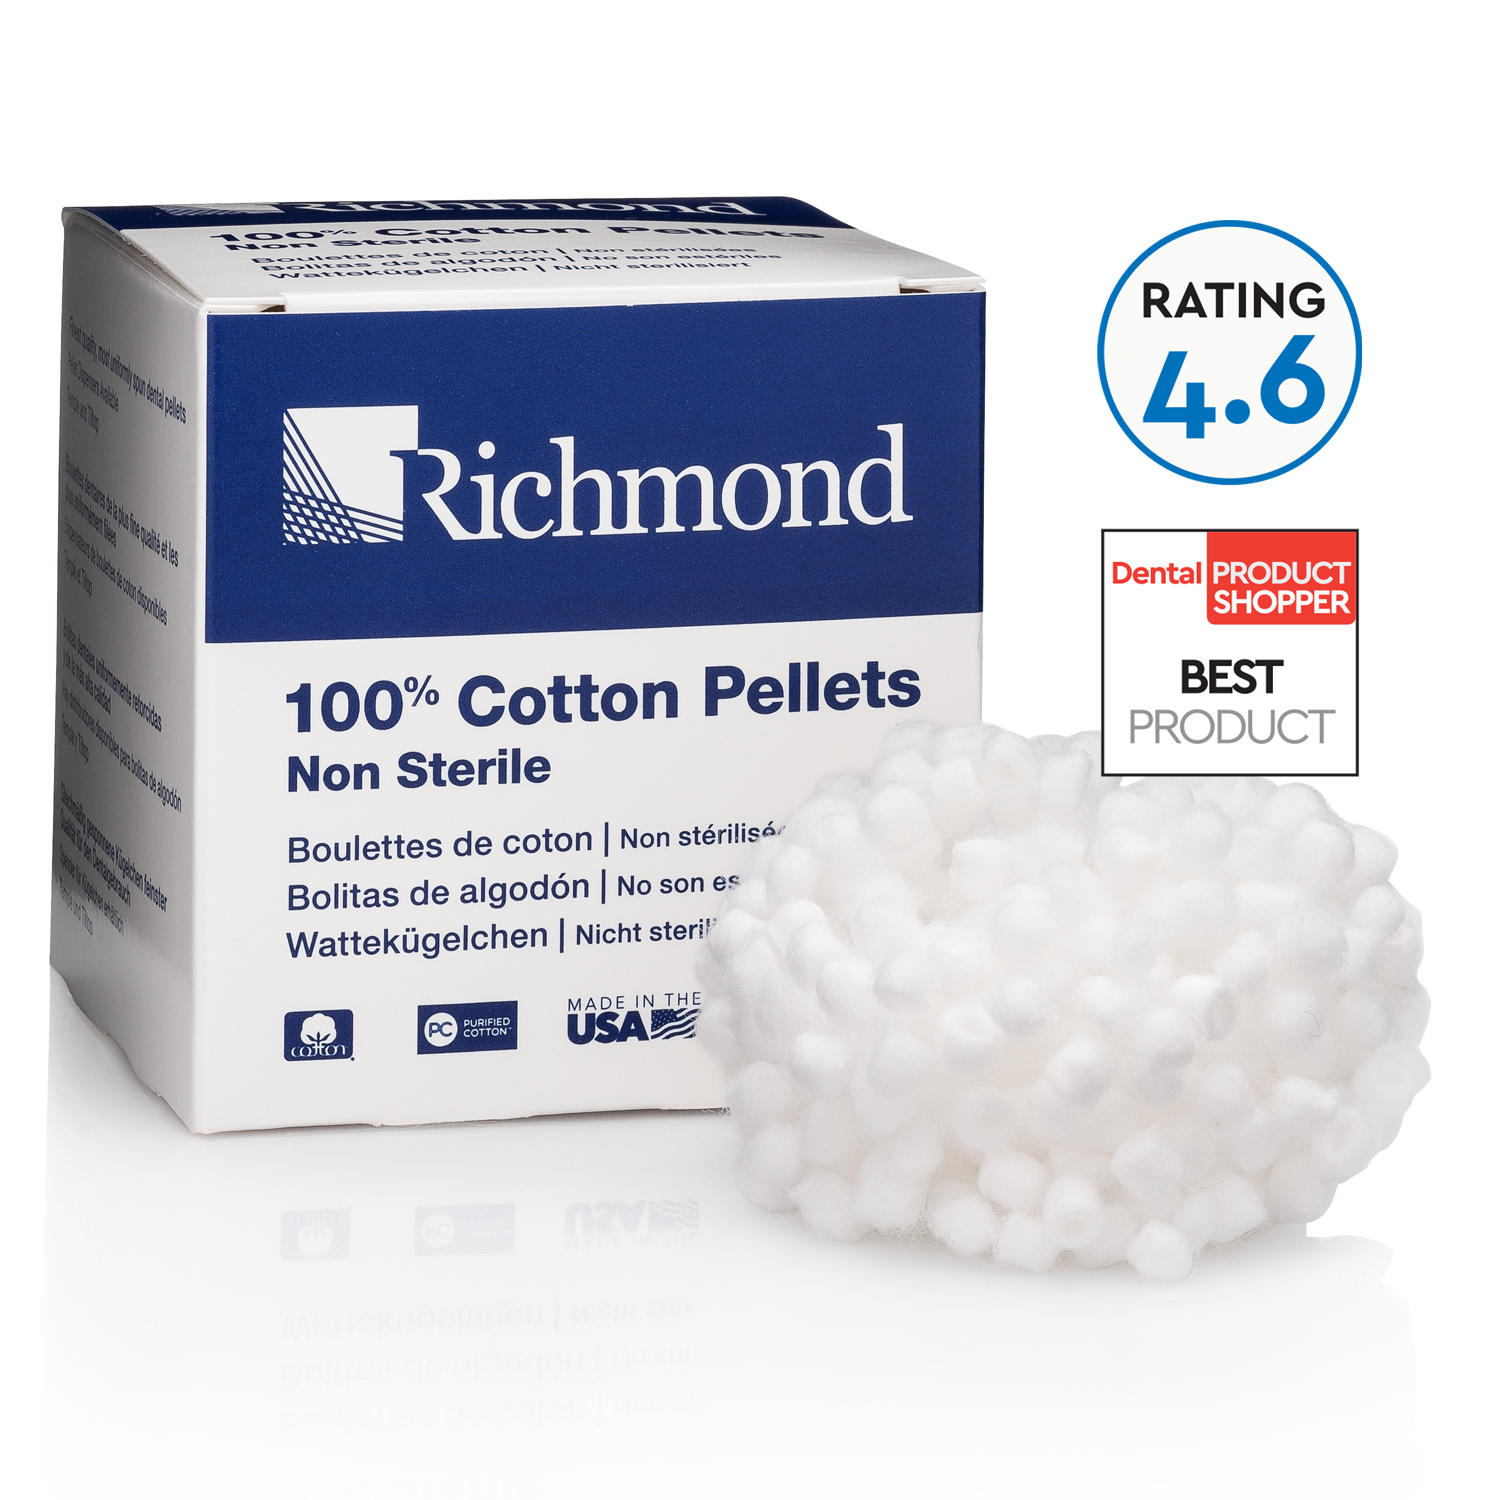 History of absorbent cotton wool in medicine-absorbent cotton